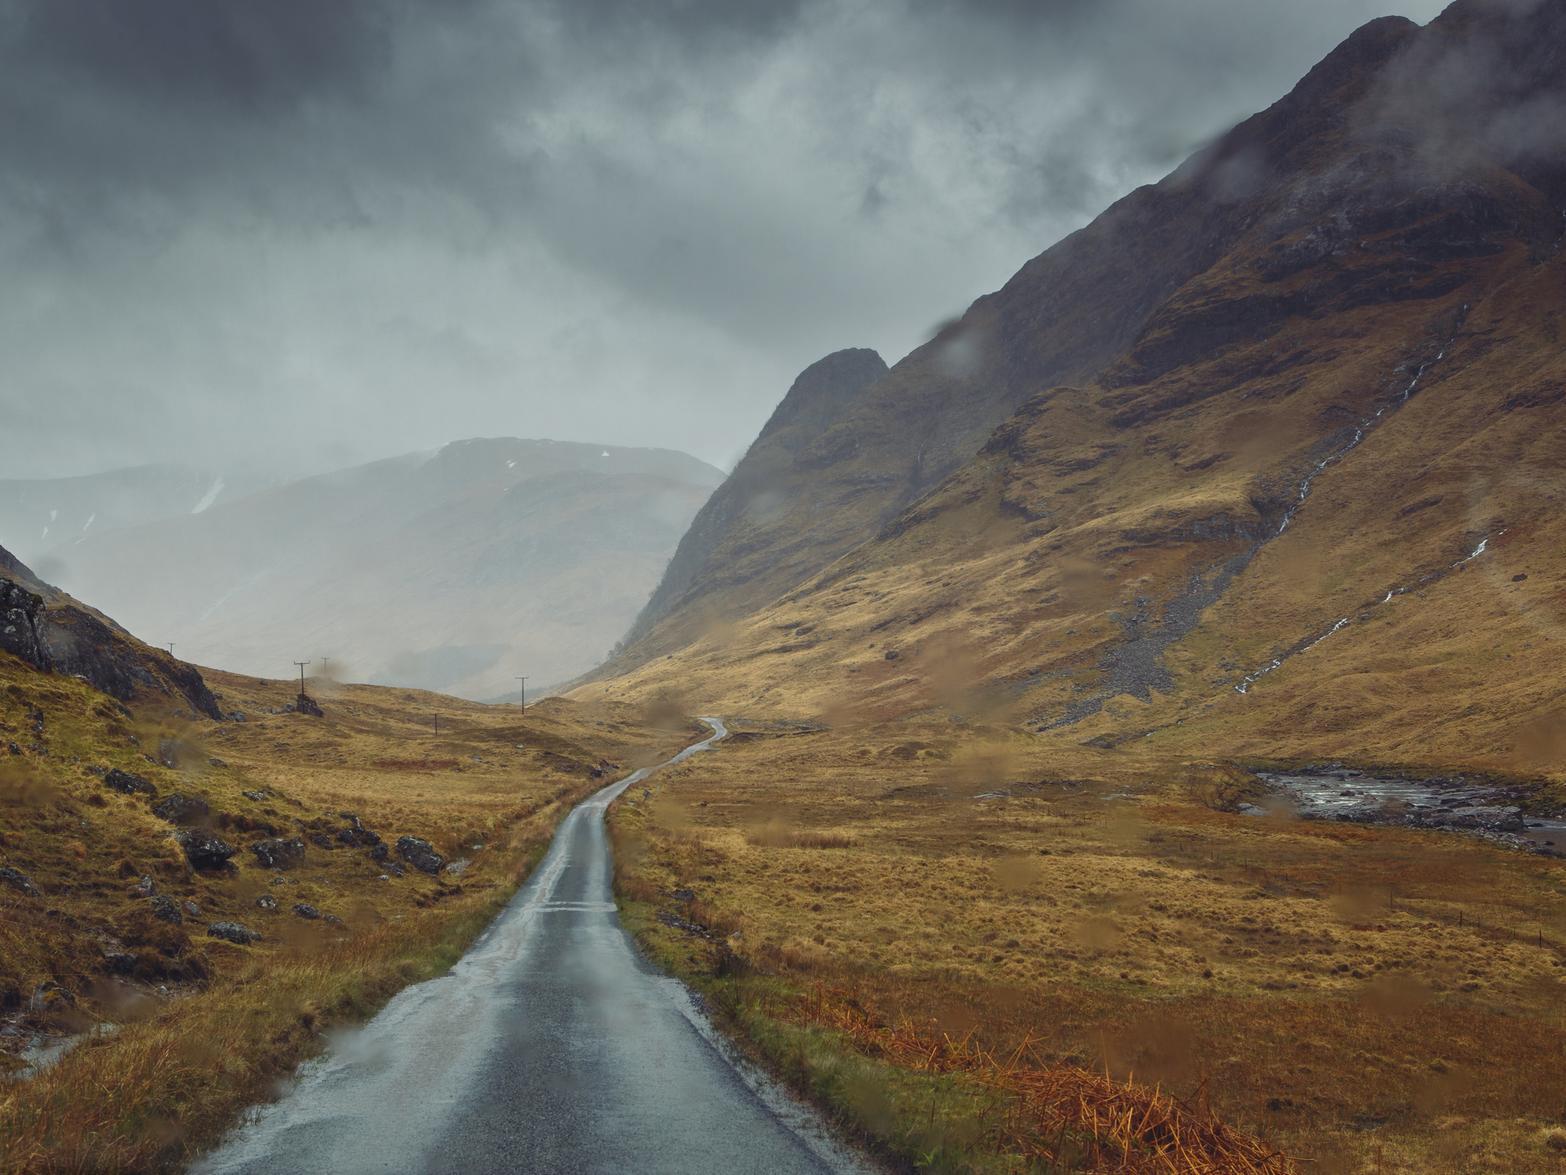 Skyfall sees James Bond return to his Scottish roots, with the main part of the film taking place at Bond's family home, Skyfall Lodge. This is located in the beautiful Glen Etive, in Glencoe Village.